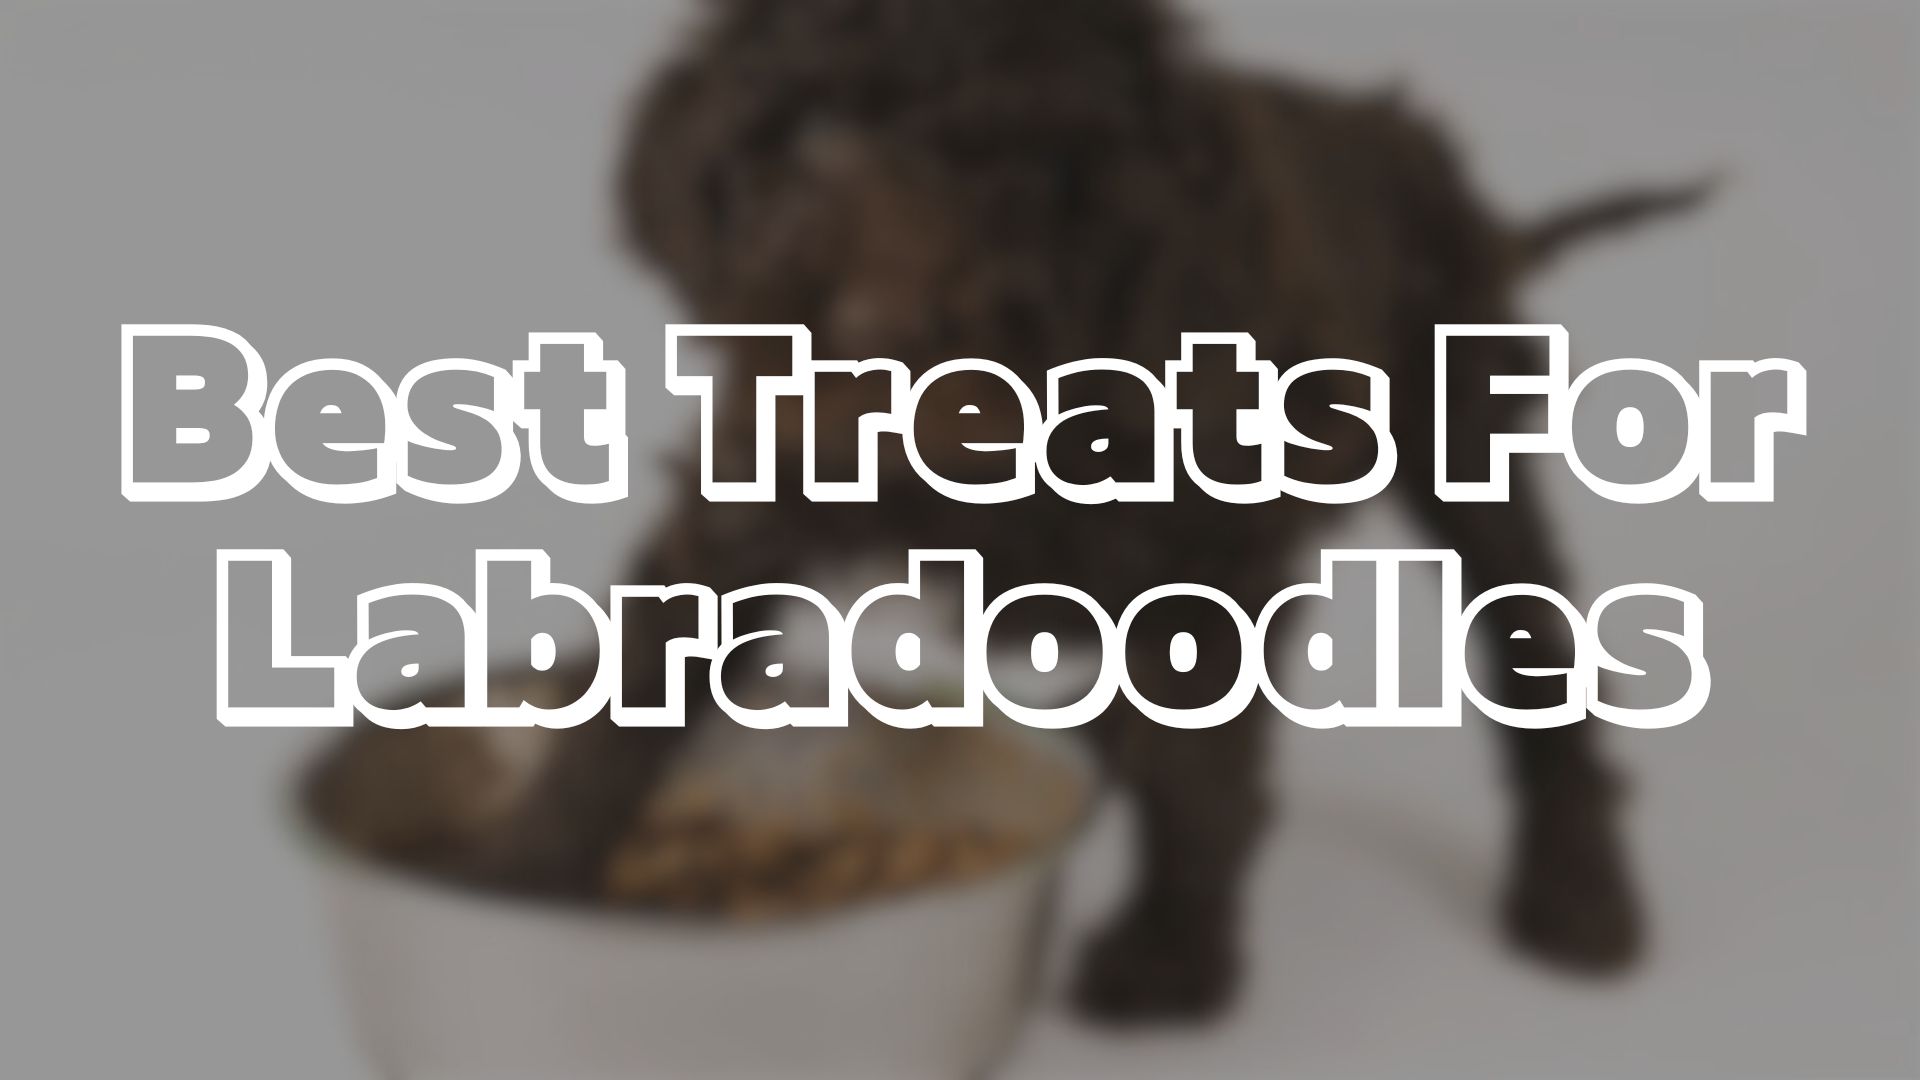 Best Treats For Labradoodles